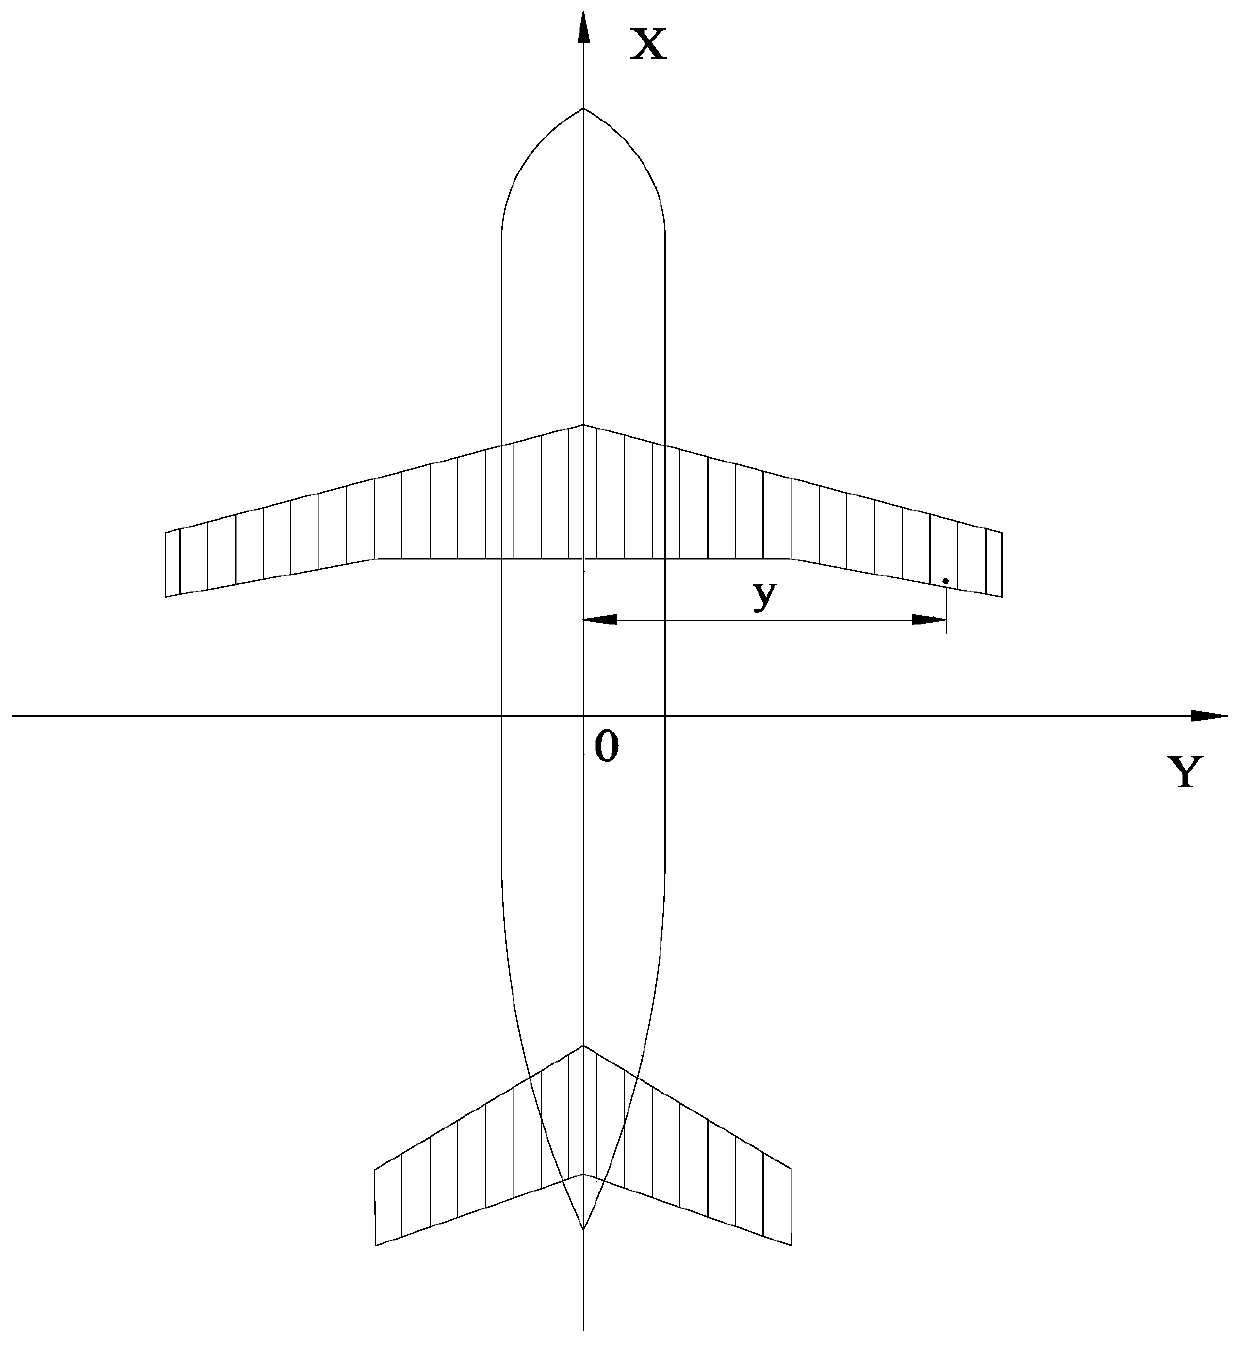 A method for measuring the rolling risk degree of an aircraft after the aircraft encounters a trailing vortex